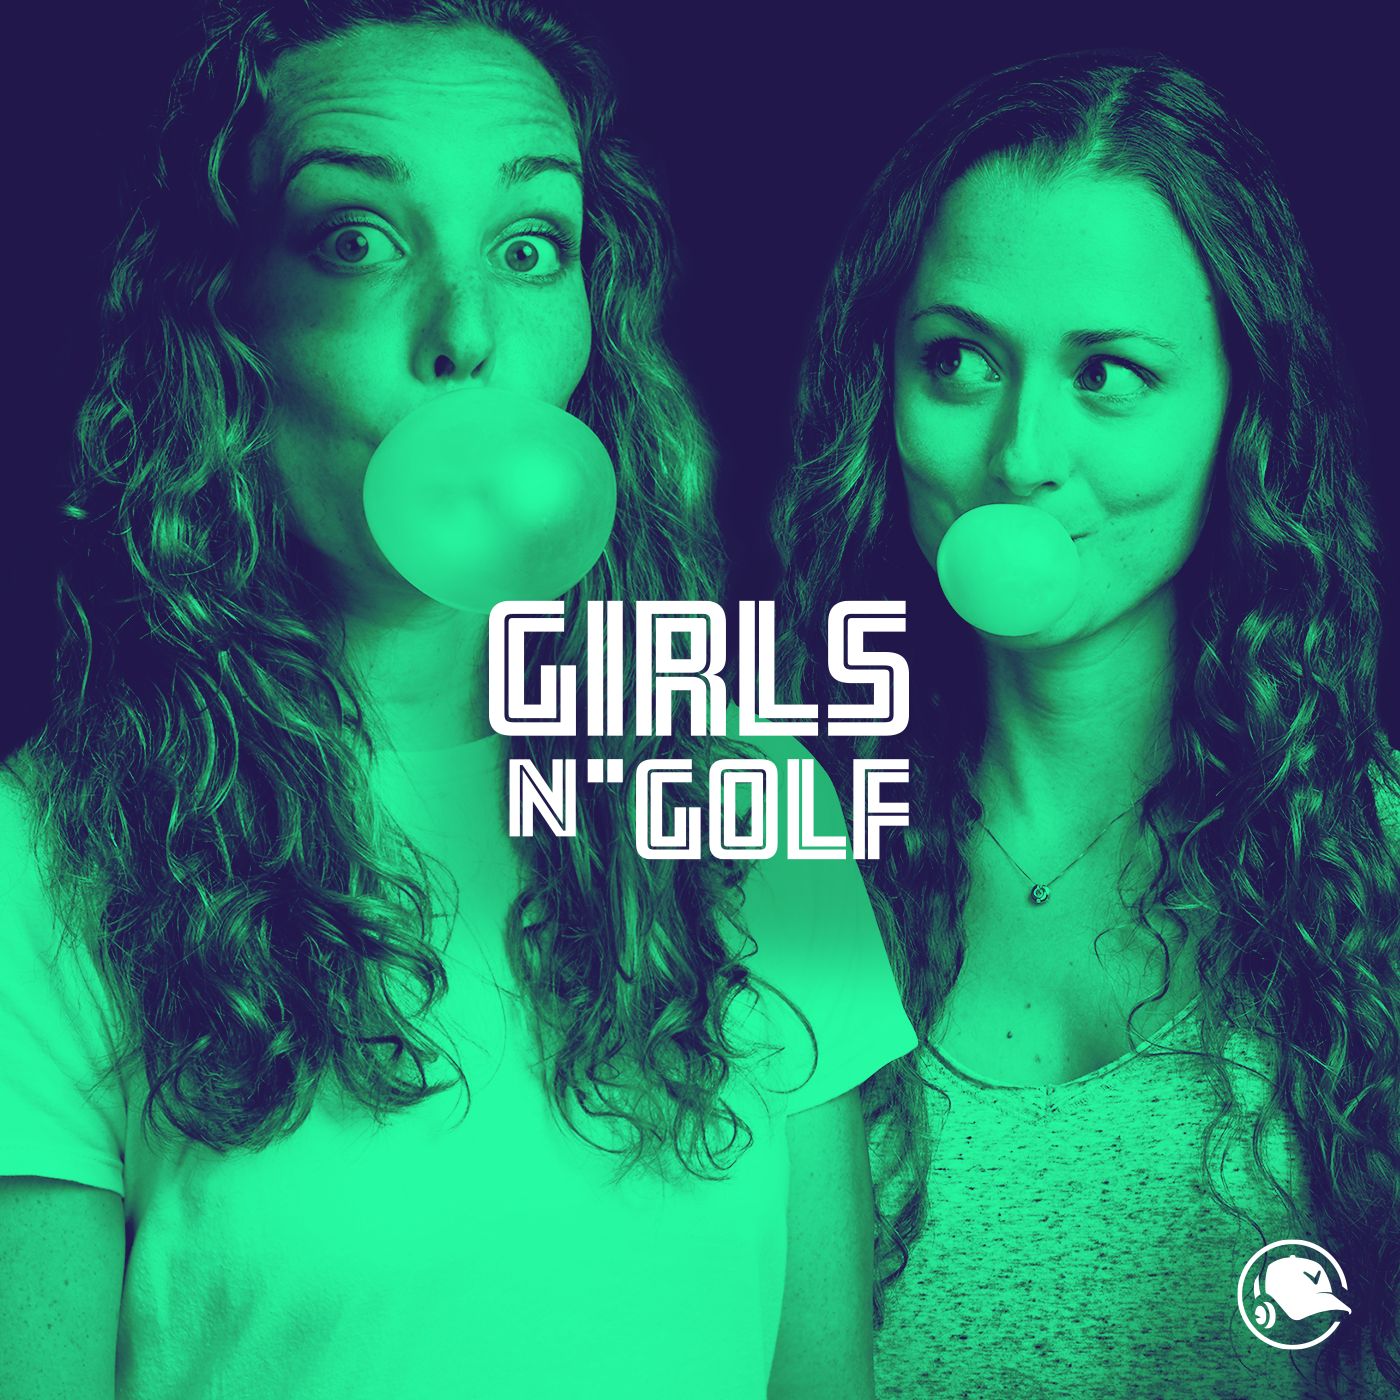 Chris Harrison - Filming in Quarantine & The Callaway Staffer He'd Golf With | Girls N' Golf Podcast